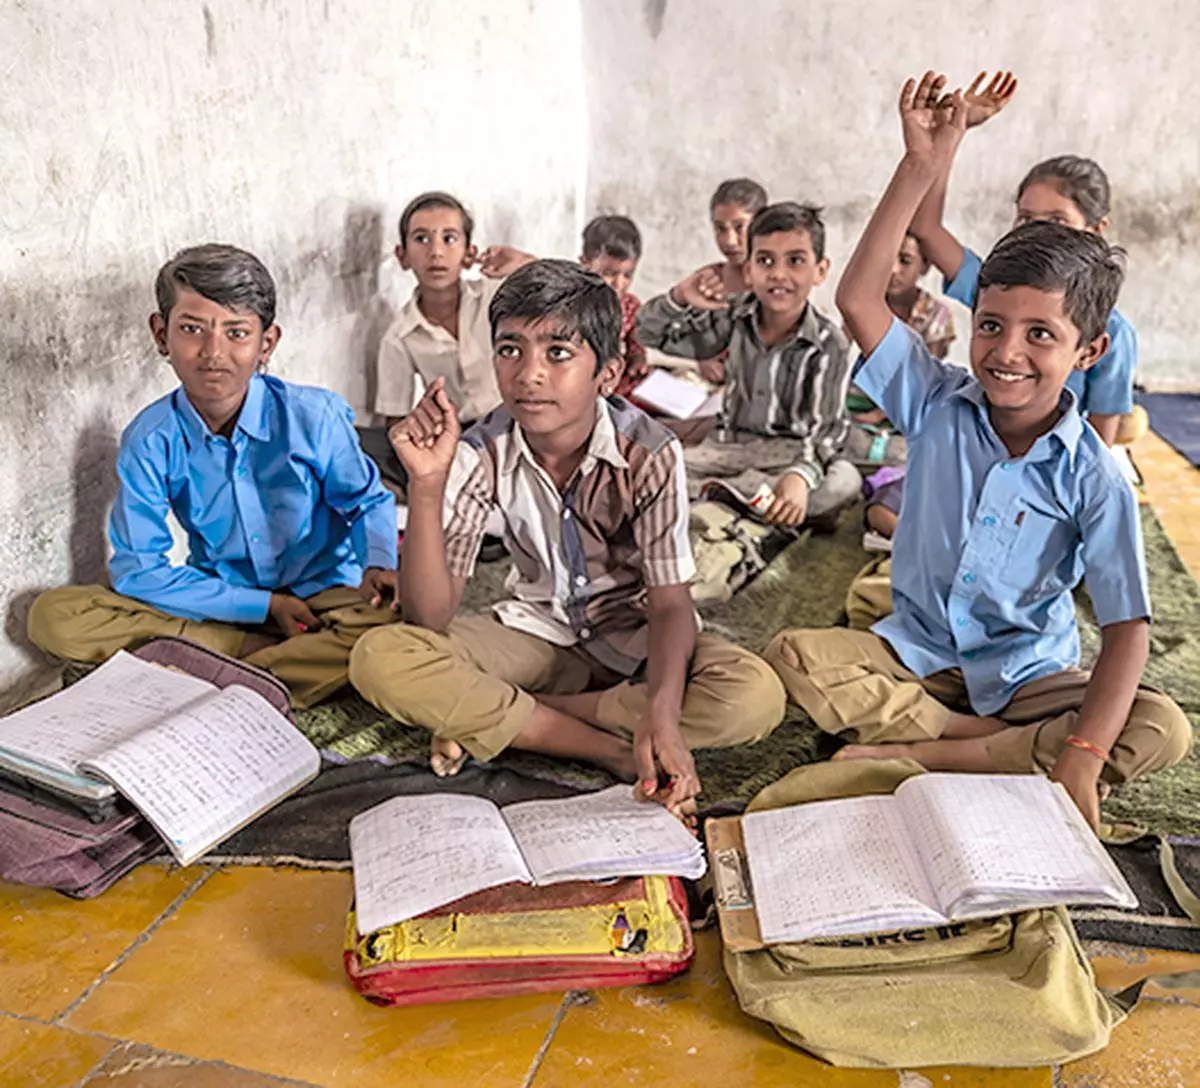 The ASER study notes a surge in enrollments in government schools in rural India. It states that 72.9 per cent of 6- to 14-year-olds currently study in government schools